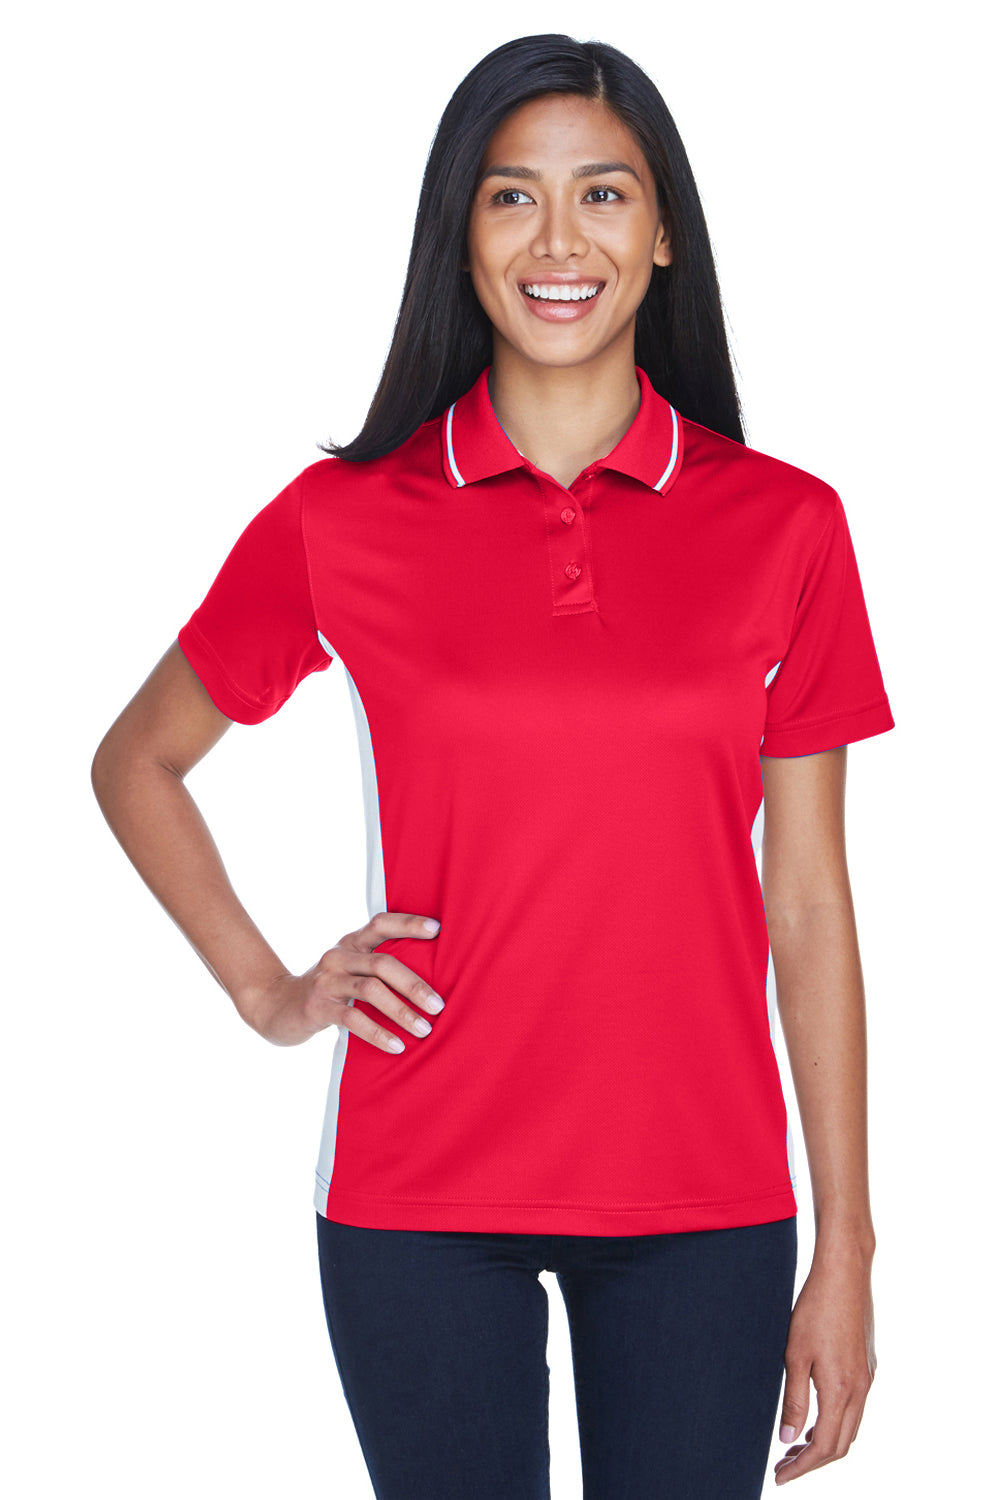 UltraClub 8406L Womens Cool & Dry Moisture Wicking Short Sleeve Polo Shirt Red/White Front